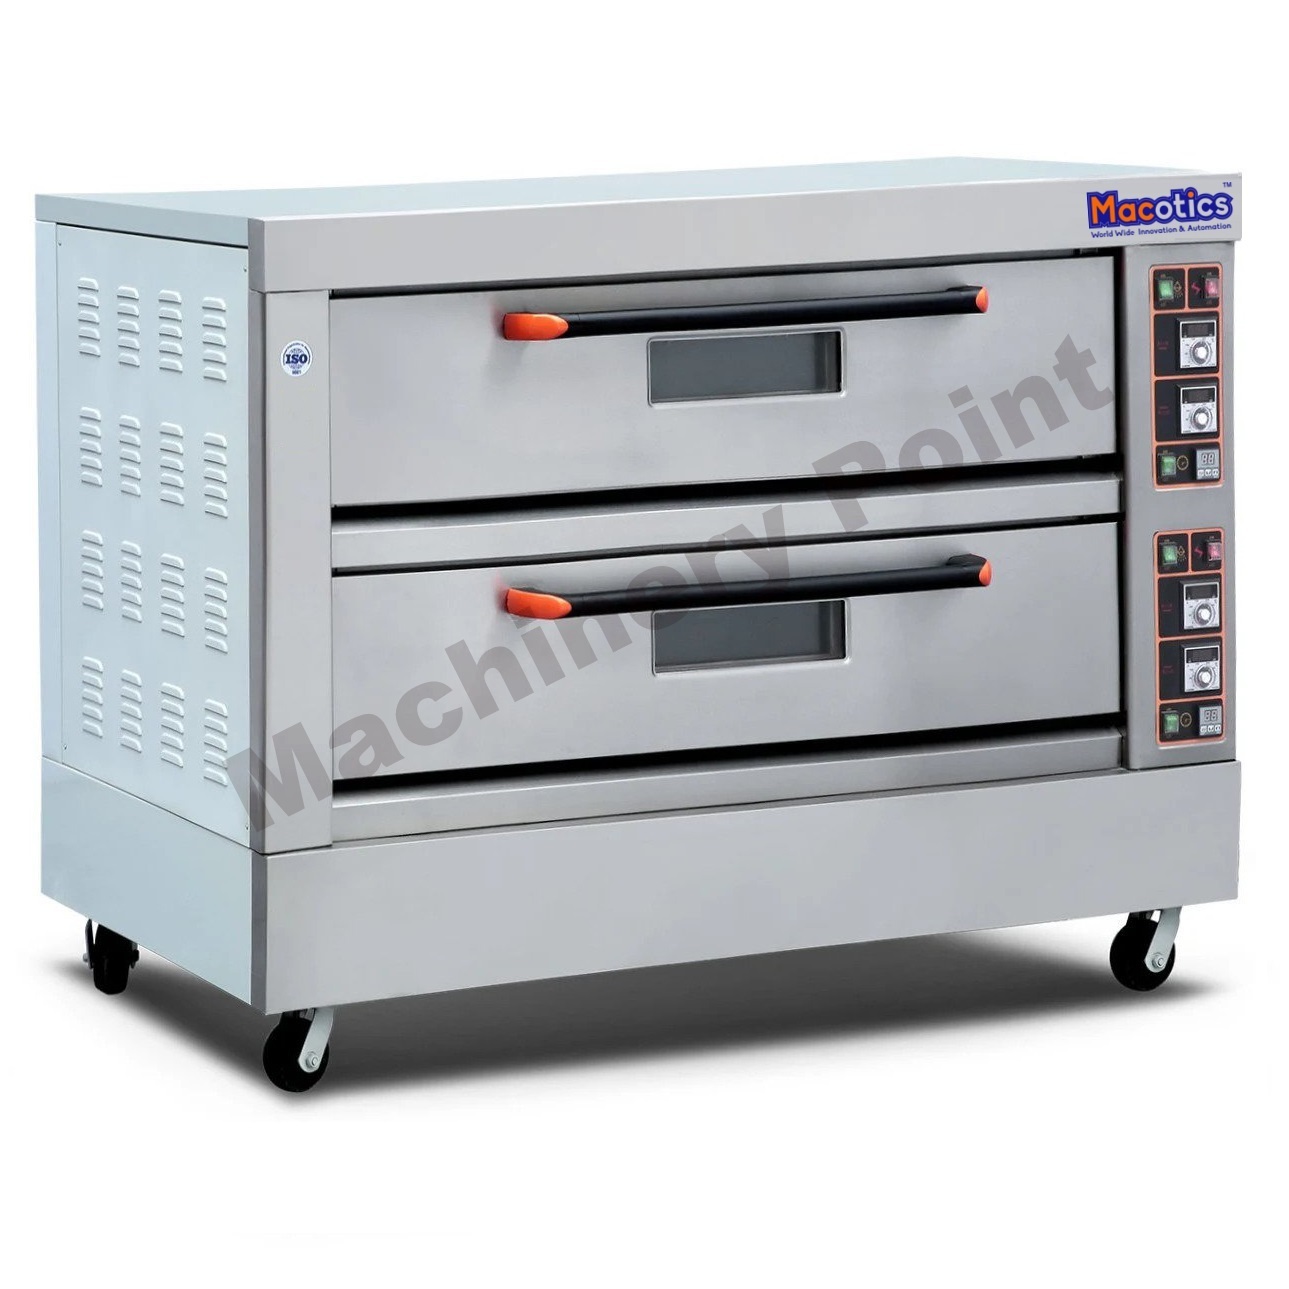 2 Deck 4 Tray Electric Oven